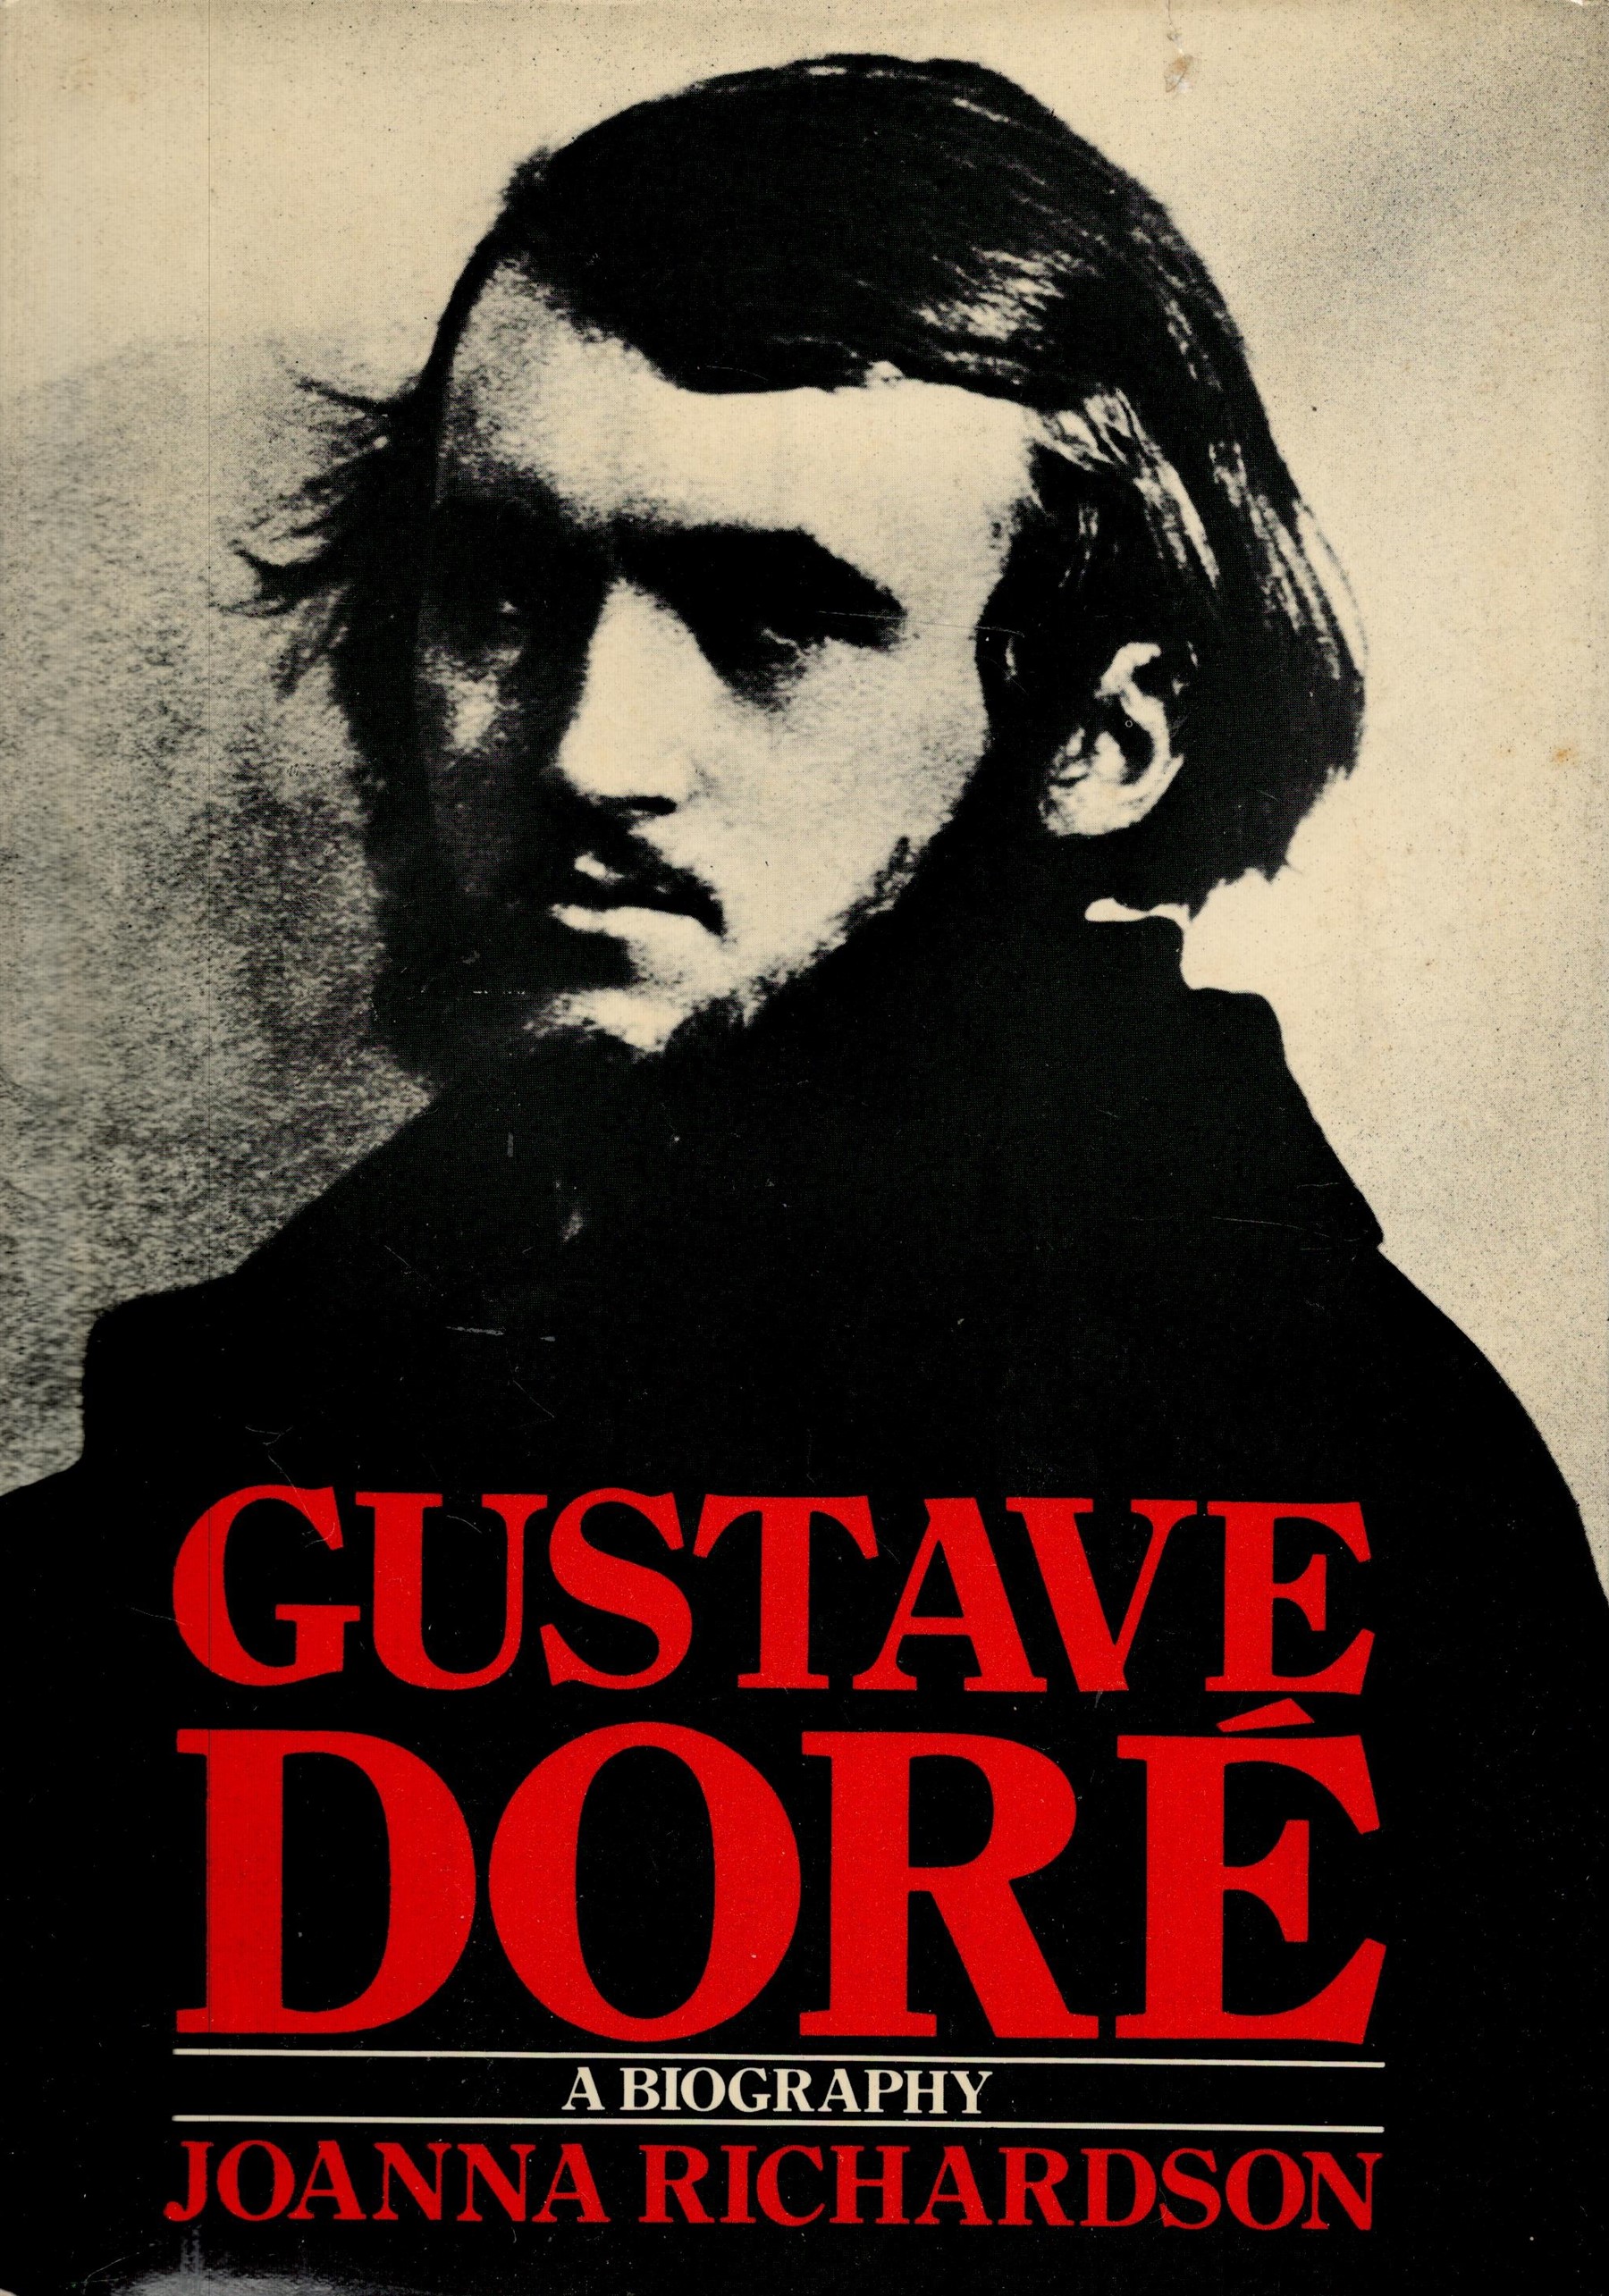 Gustave Dore A Biography by Joanna Richardson Hardback Book 1980 First Edition published by